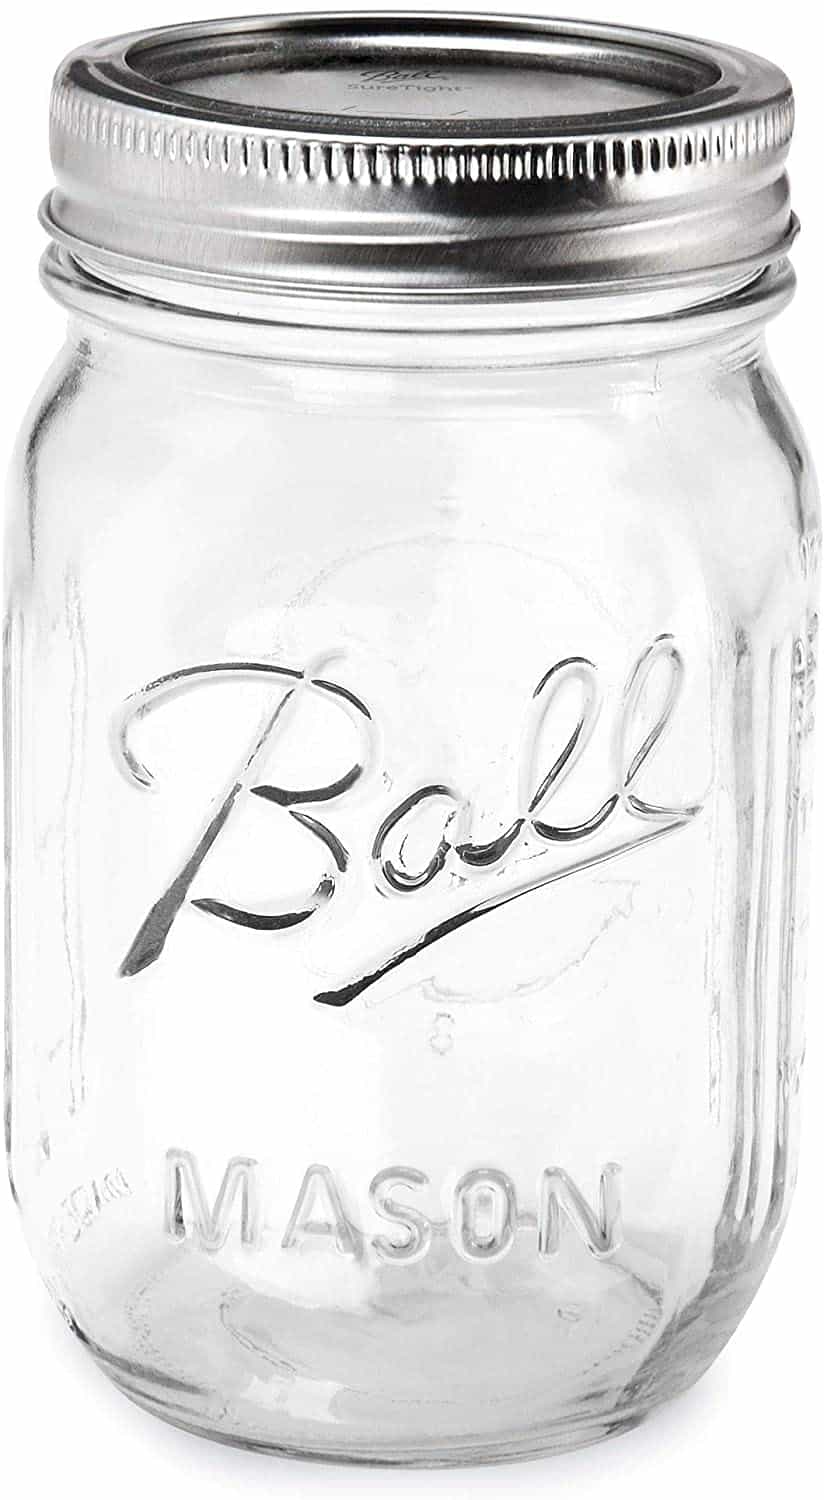 Ball Regular Mouth Mason Jars with Lids and Bands, 16-Ounces (4-Pack)